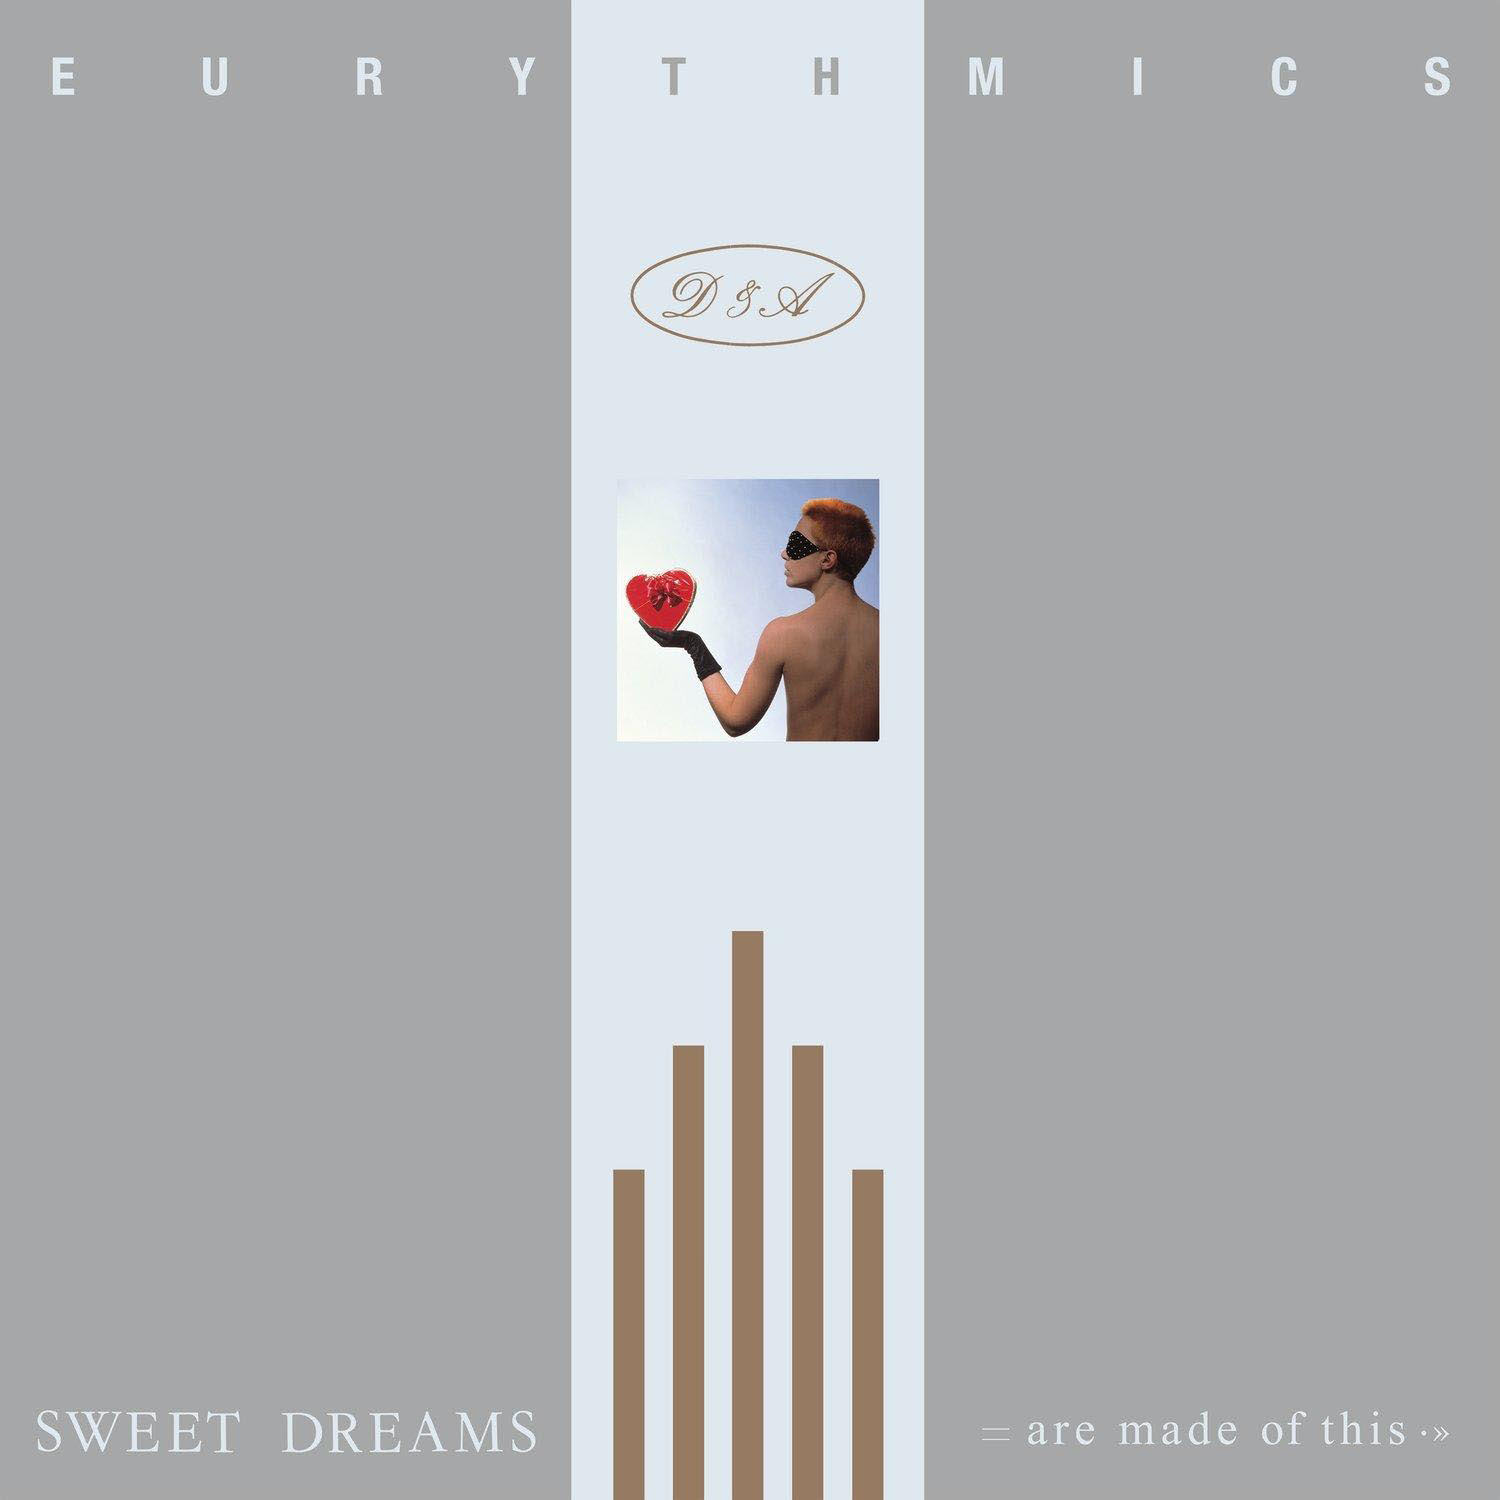 Eurythmics - Sweet Dreams of (Are (Vinyl) This) - Made